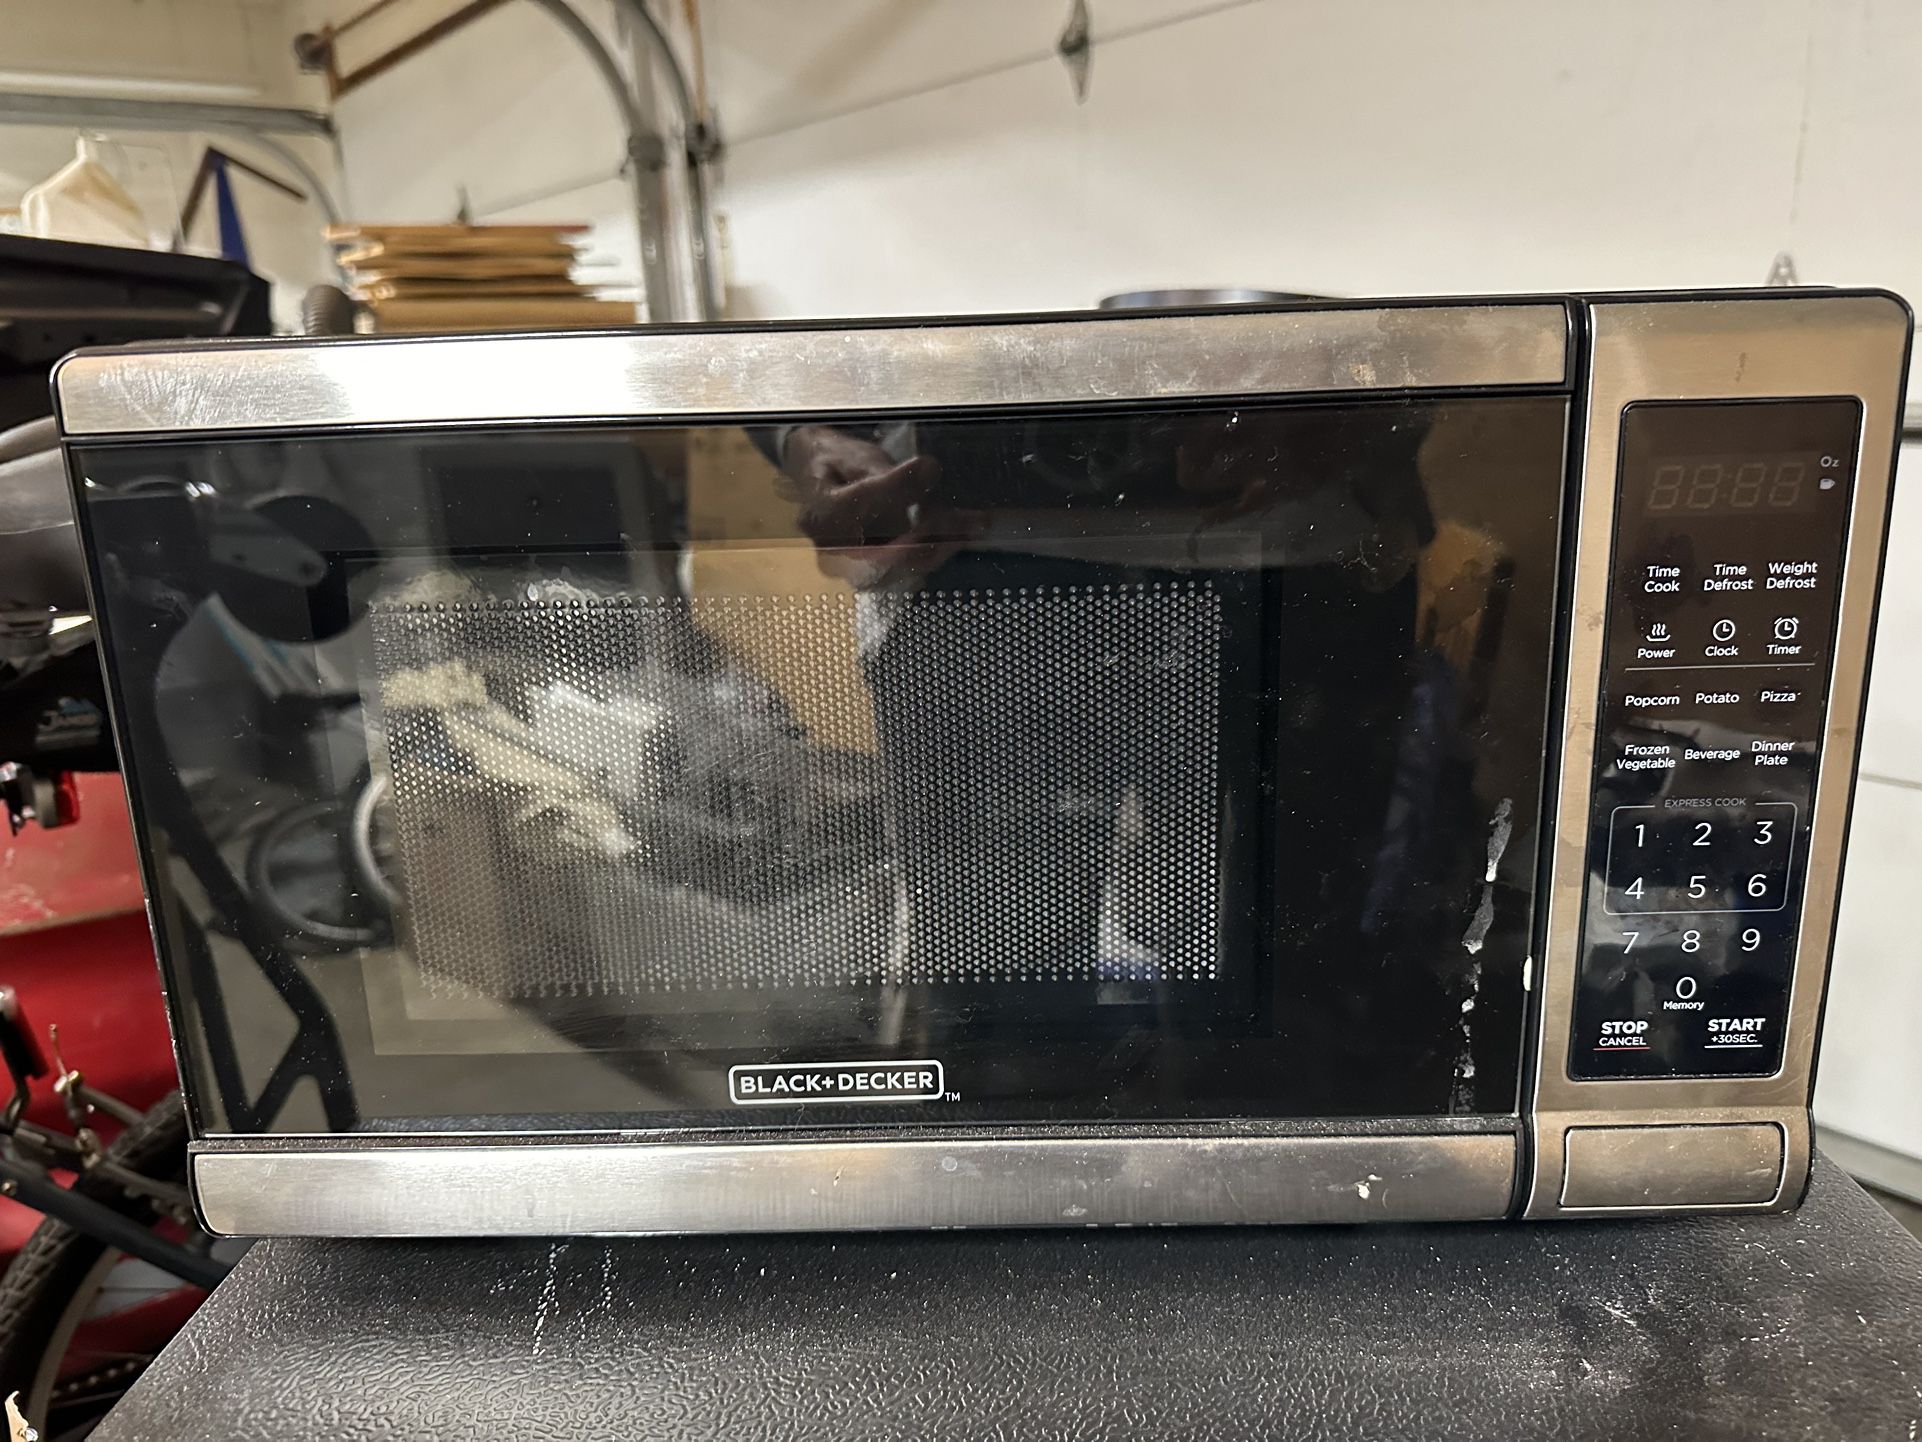 Microwave (small) for Dorm or Office LIKE NEW